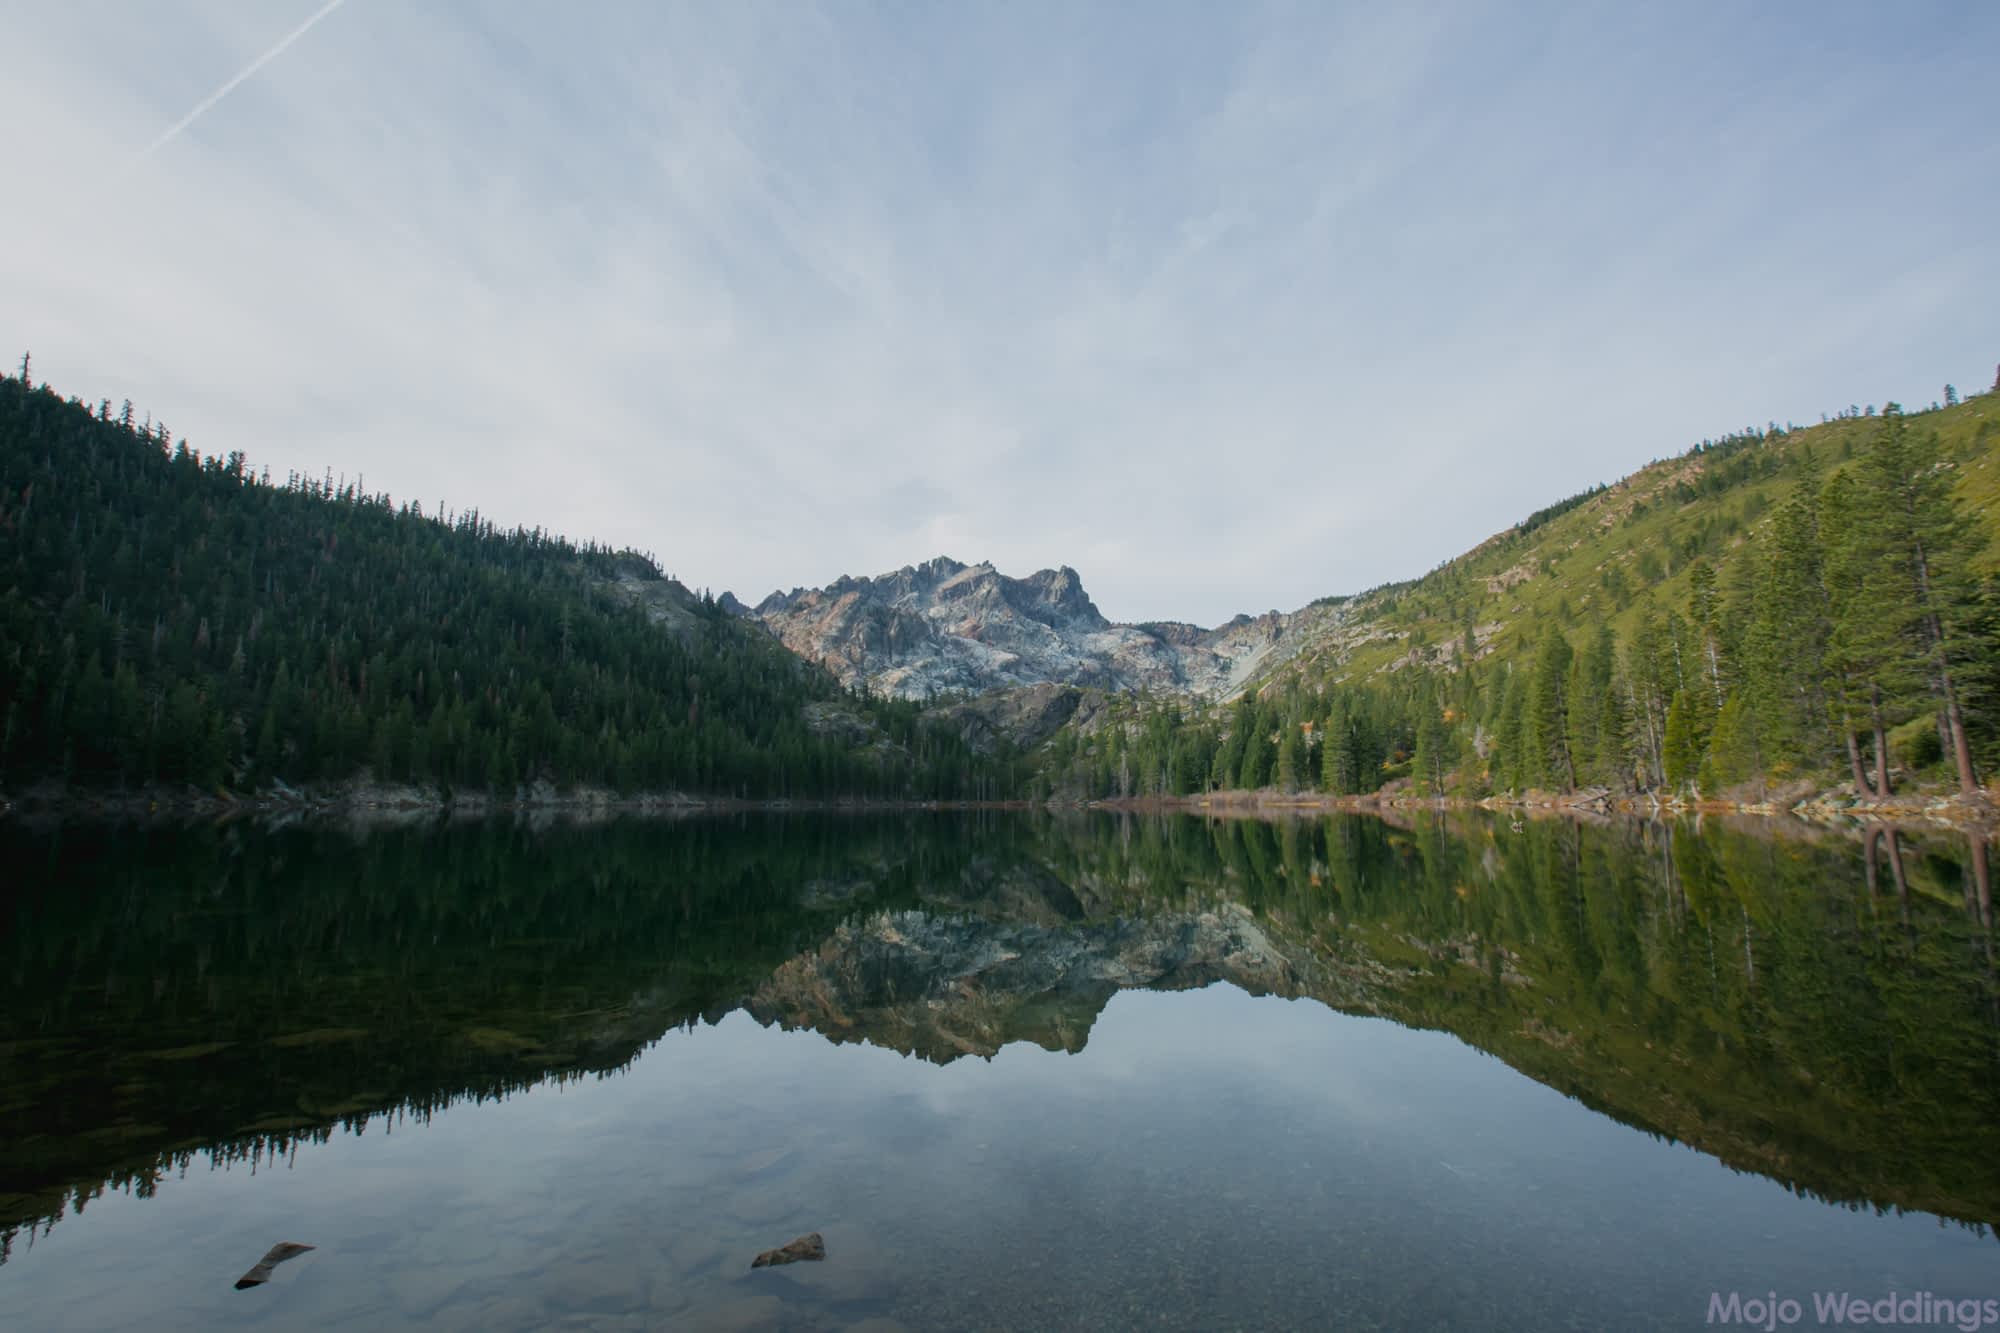 A mountain and trees are reflected in a lake.